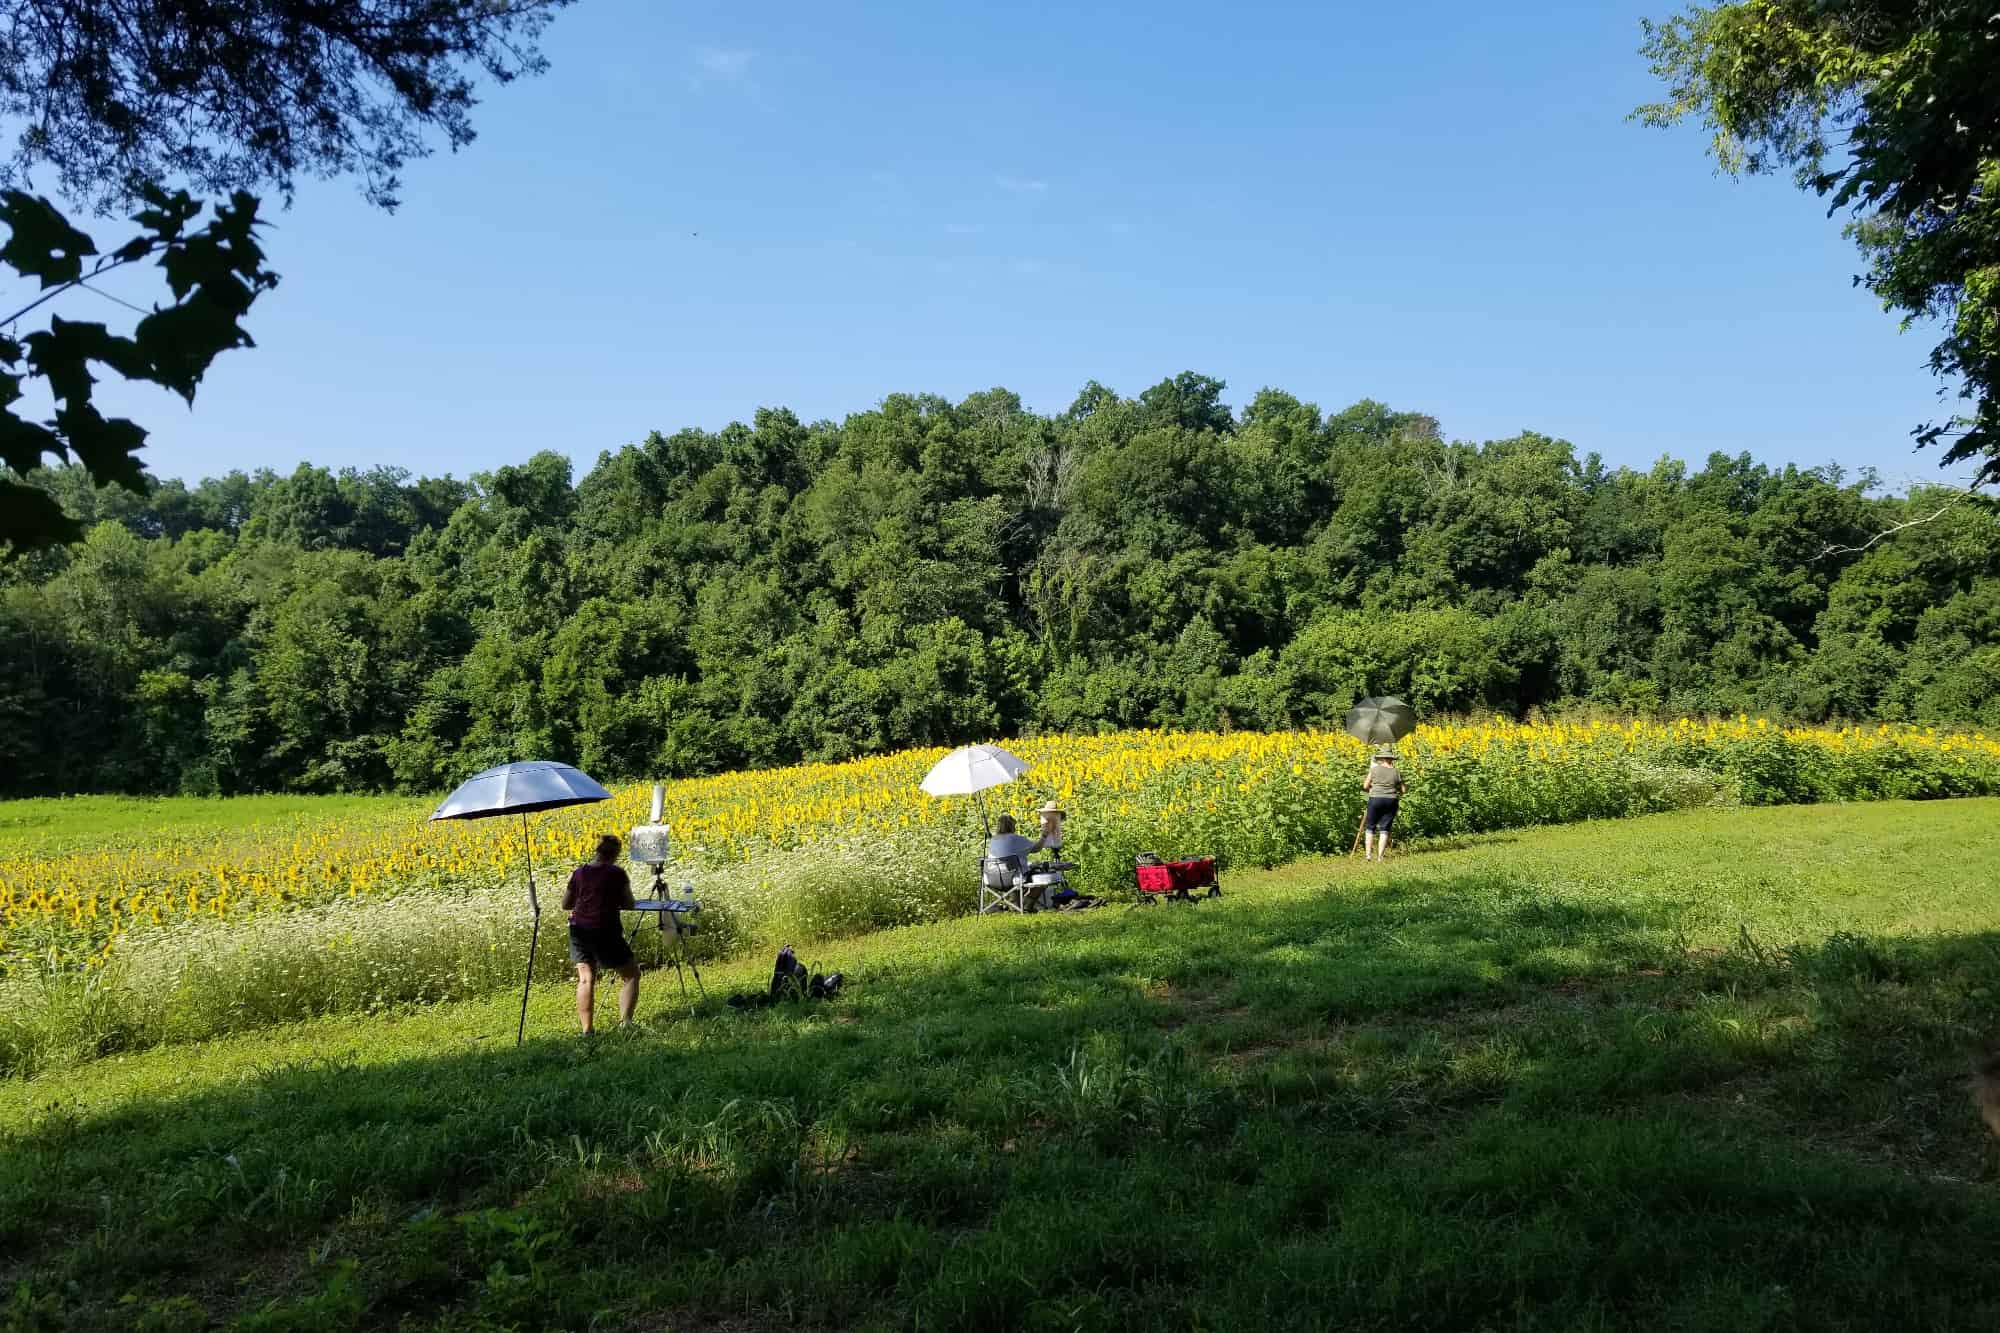 Painters next to a sunflower field in Forks of the River WMA